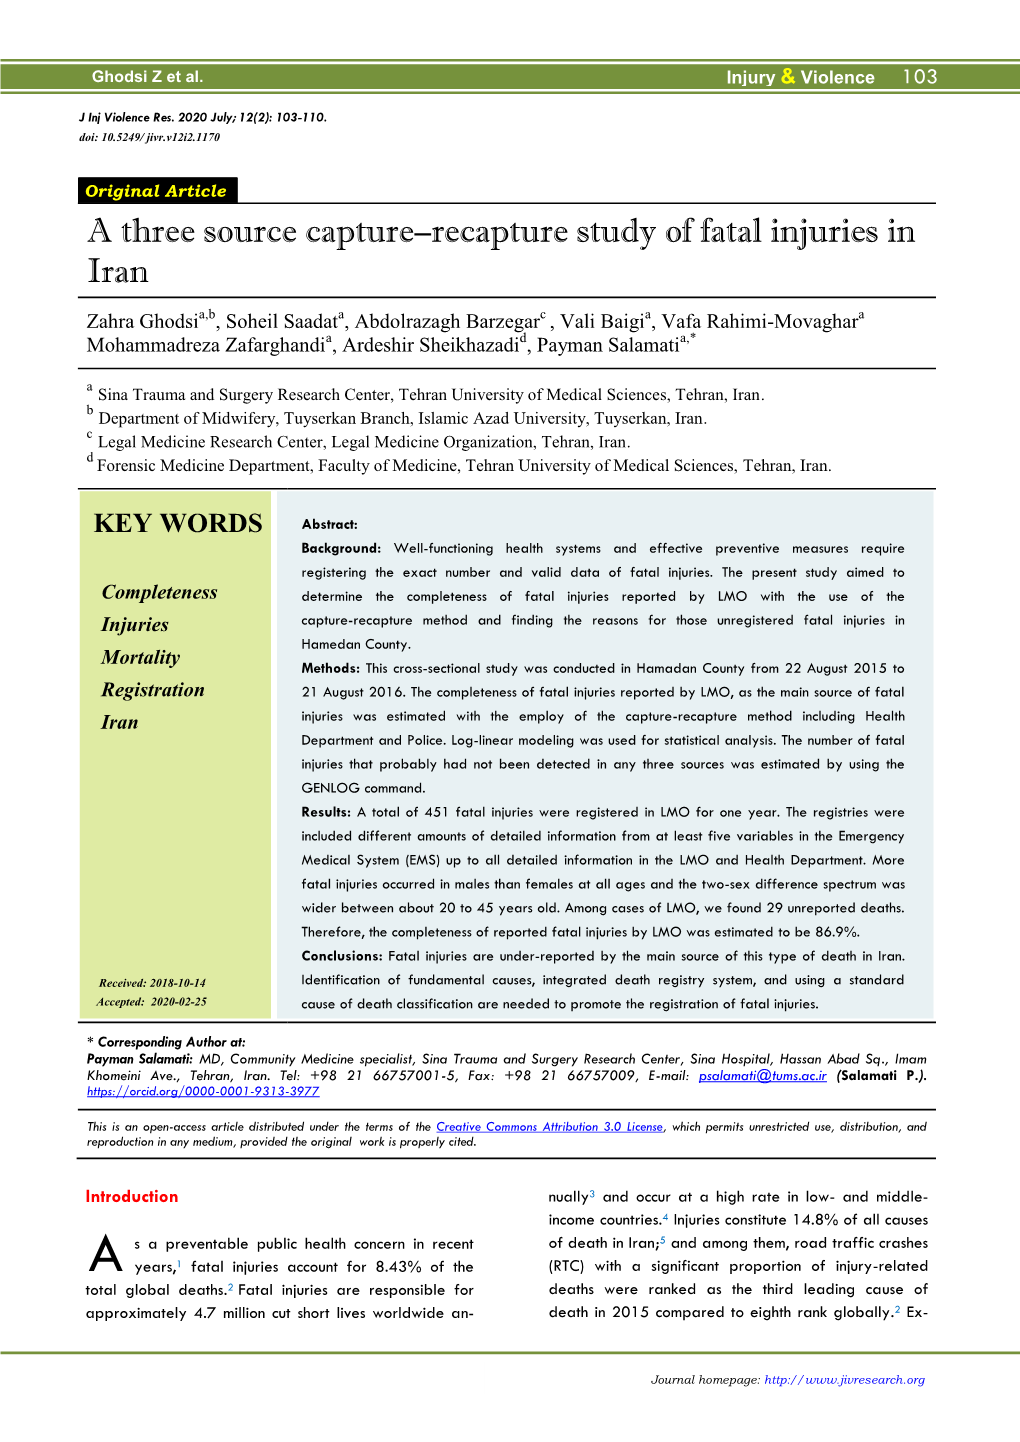 A Three Source Capture–Recapture Study of Fatal Injuries in Iran